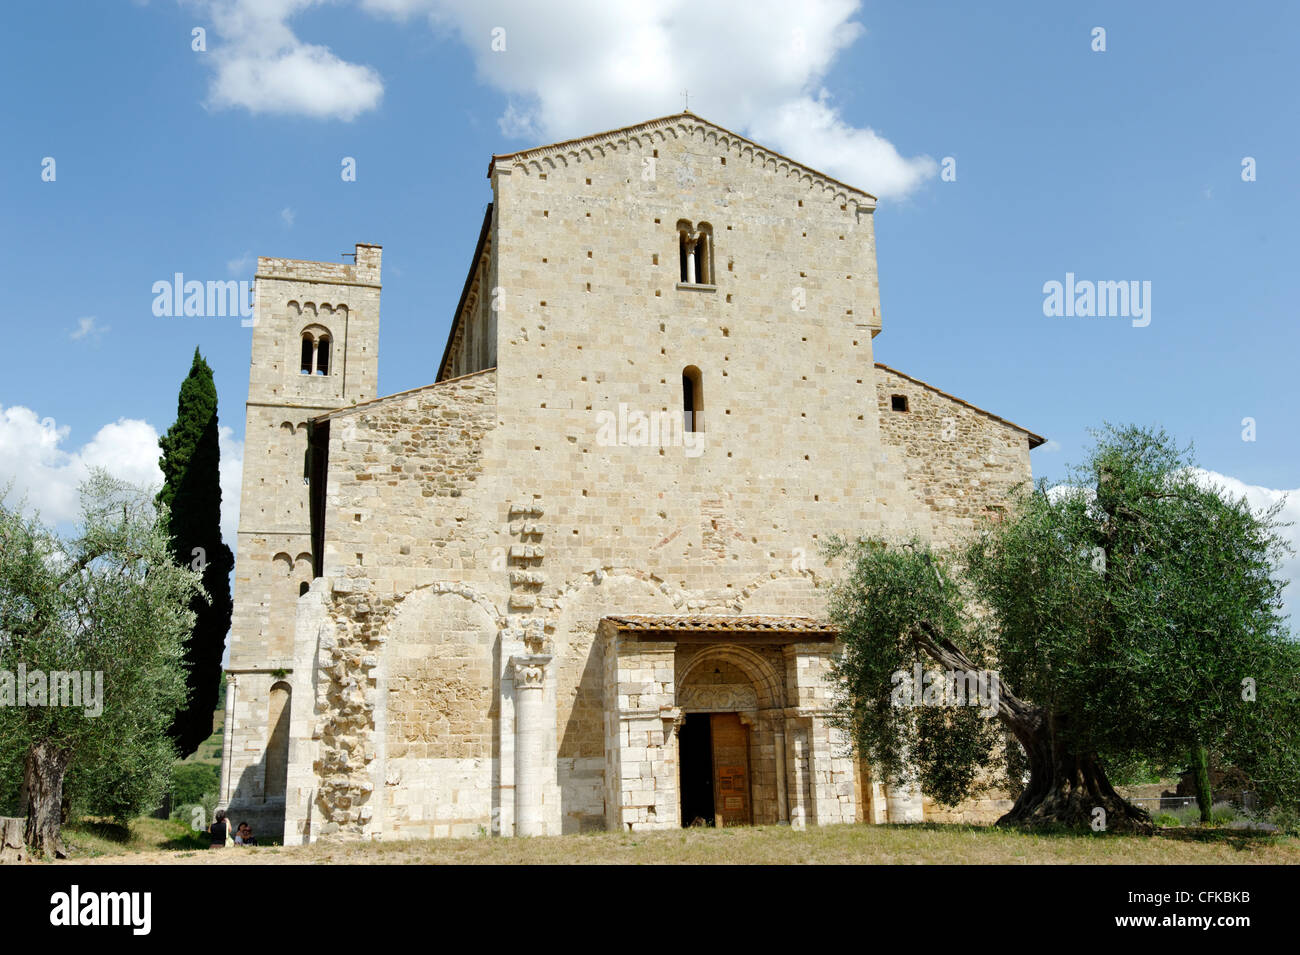 Sant’Antimo. Tuscany. Italy. View of façade of the side of the 12th century abbey church of Sant’Antimo with beautiful setting Stock Photo